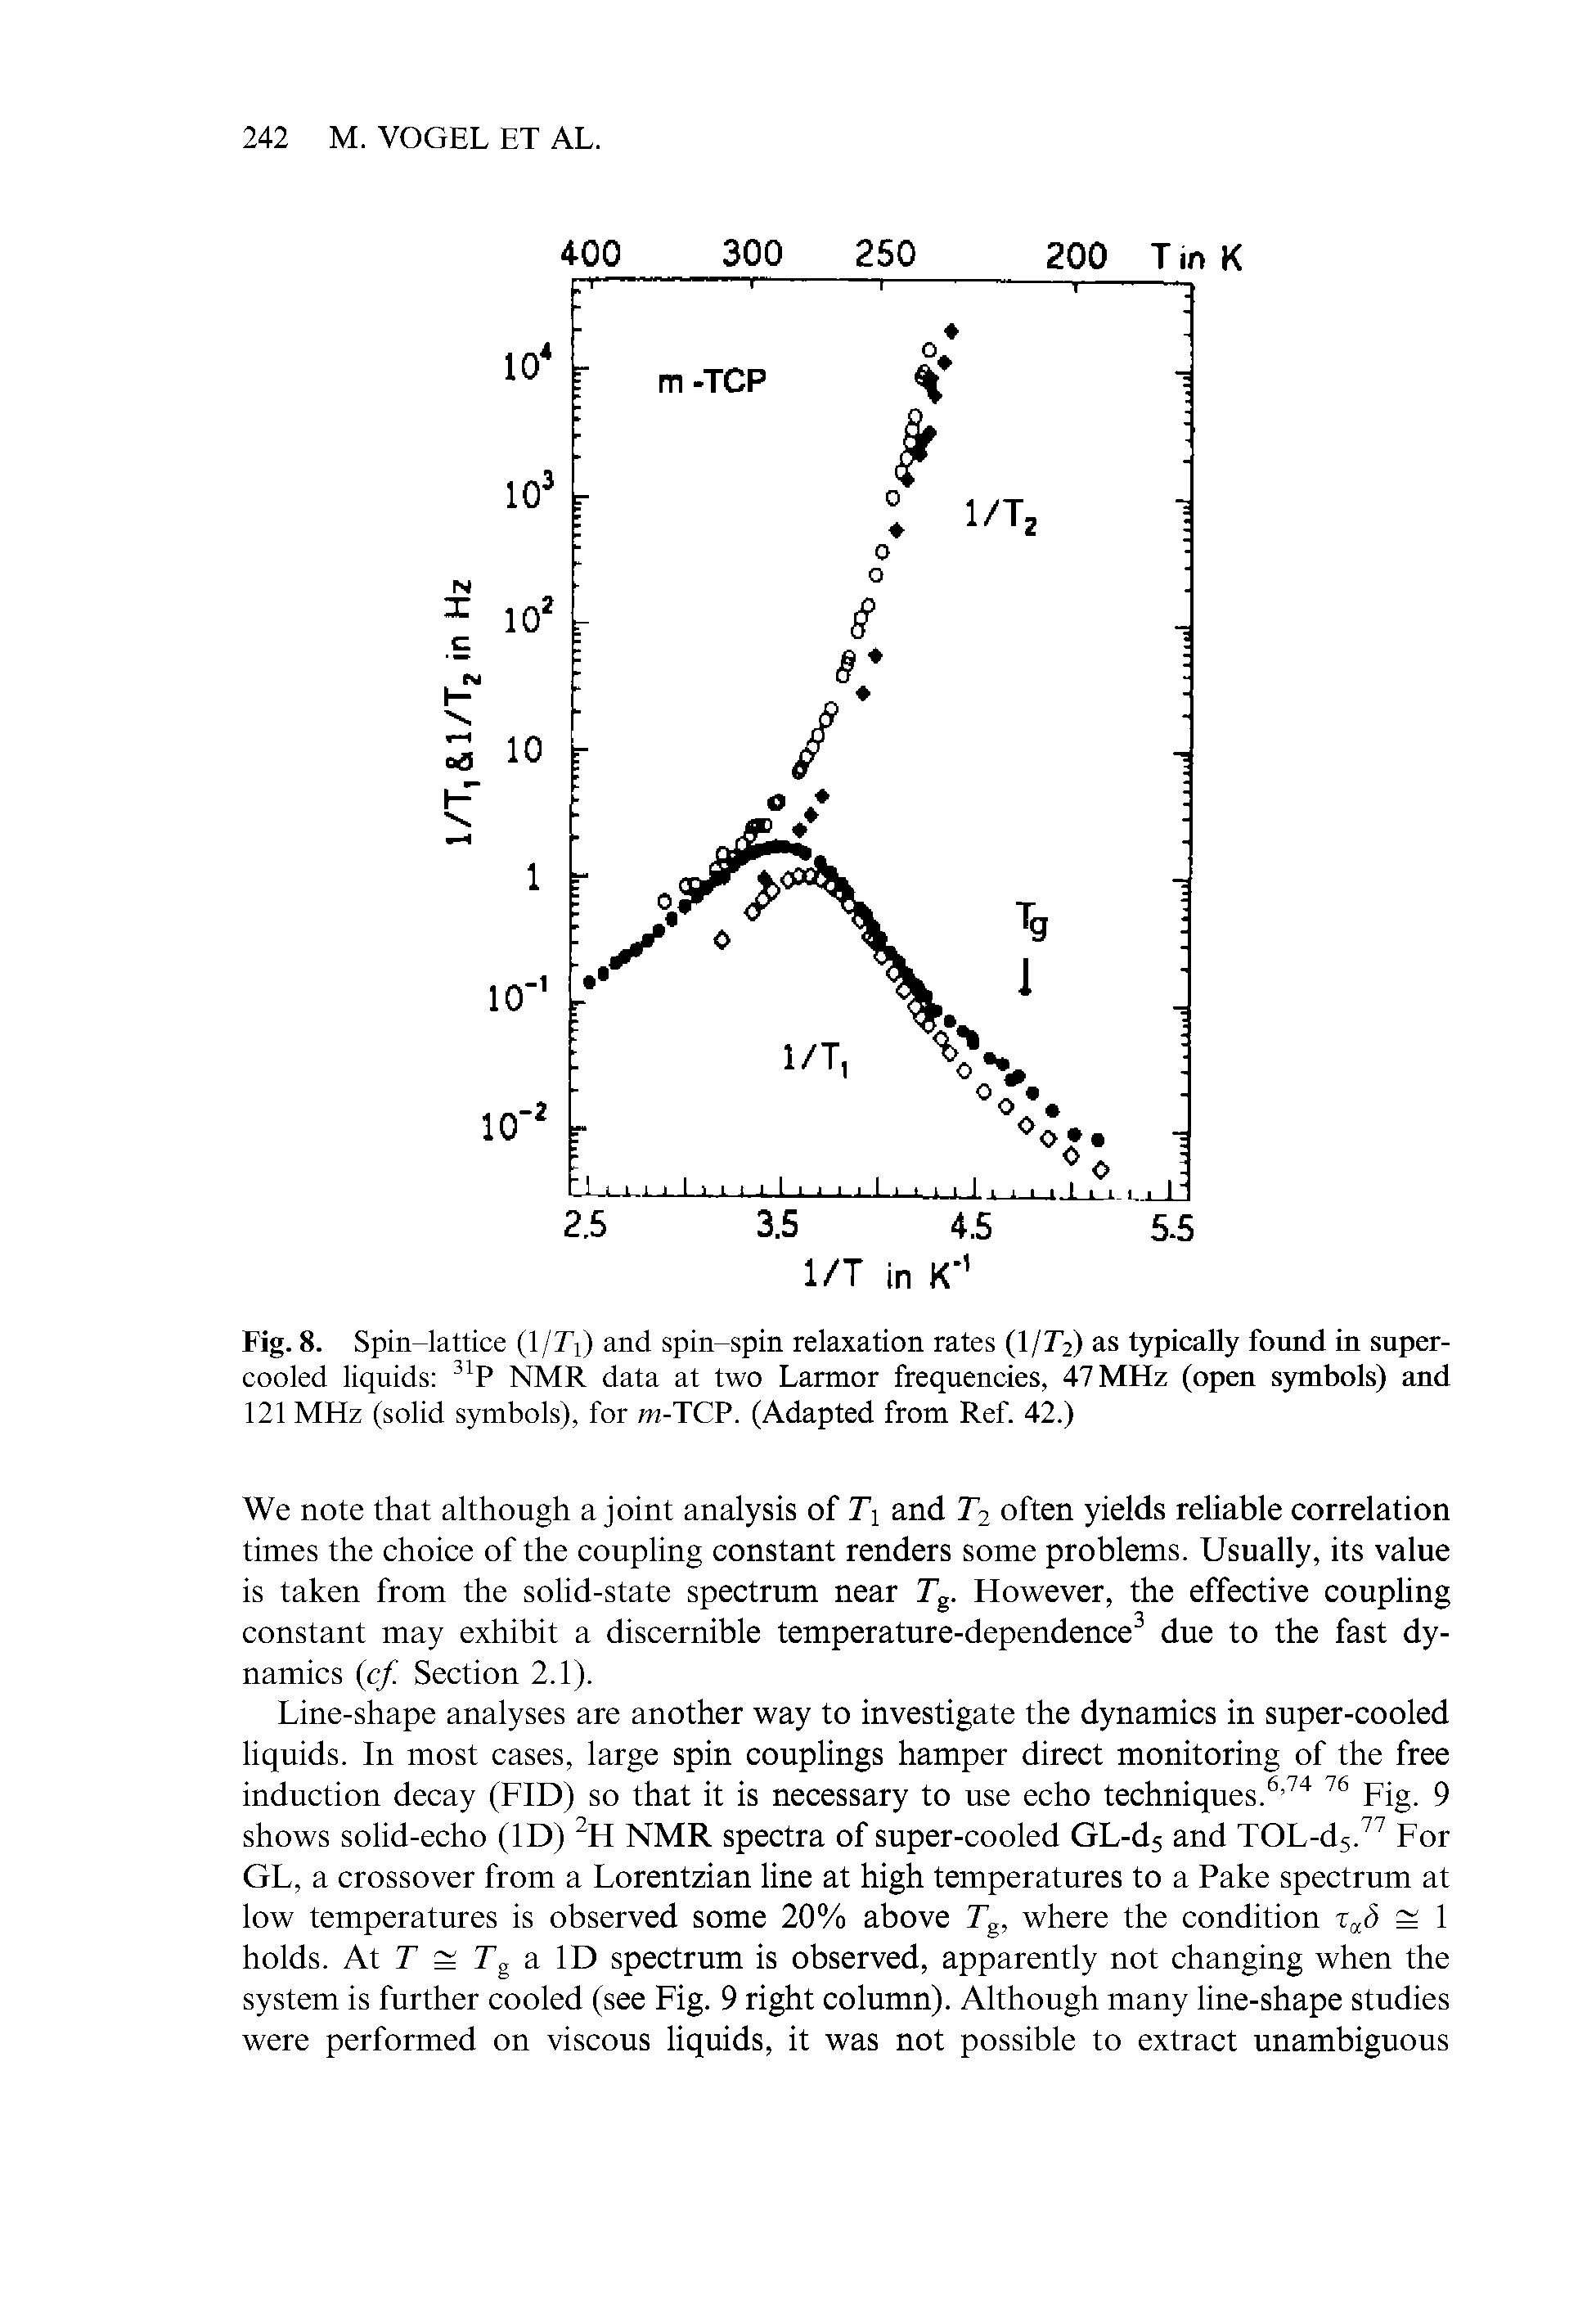 Fig. 8. Spin-lattice (1/7)) and spin-spin relaxation rates (l/72) as typically found in supercooled liquids 31P NMR data at two Larmor frequencies, 47 MHz (open symbols) and 121 MHz (solid symbols), for m-TCP. (Adapted from Ref. 42.)...